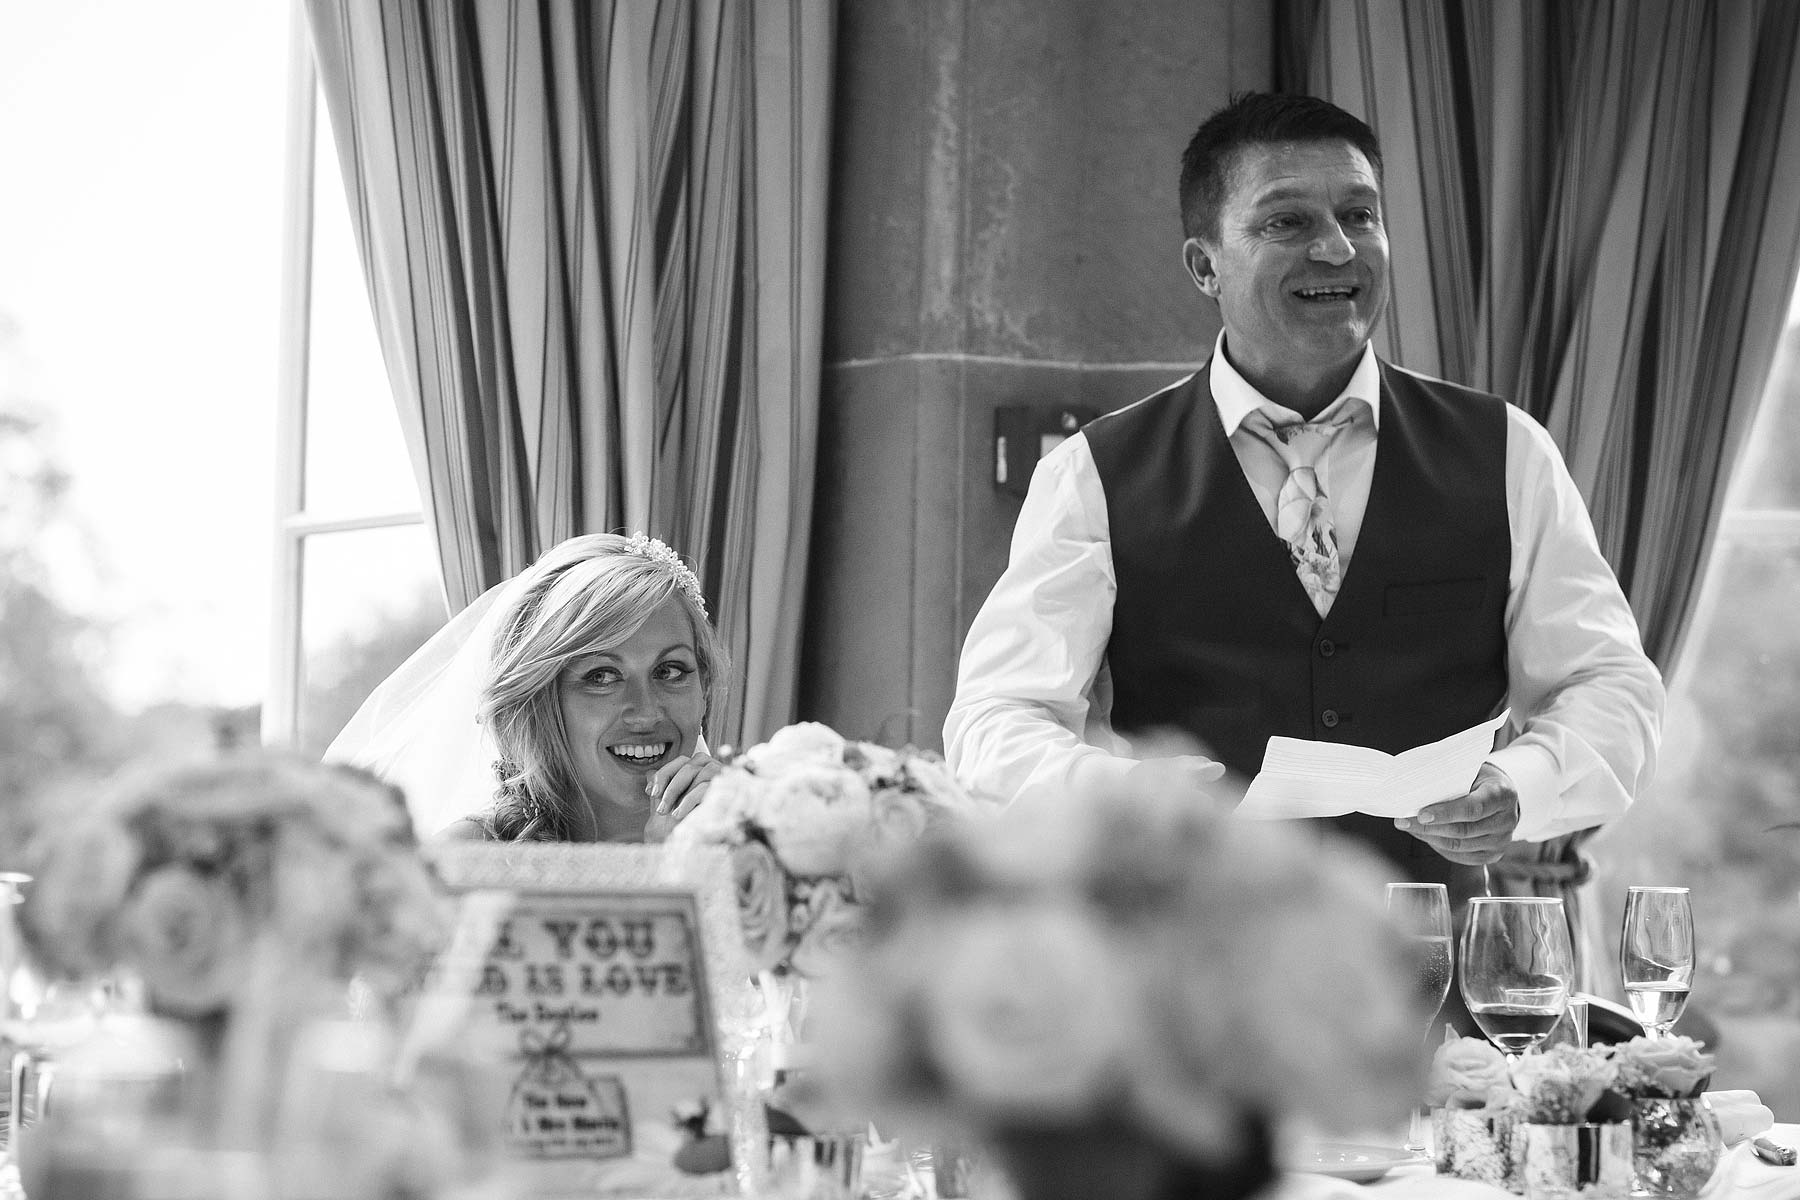 Capturing reactions to fabulous speeches with candid wedding photography at Weston Park in Weston-under-Lizard by Staffordshire Wedding Photographer Stuart James